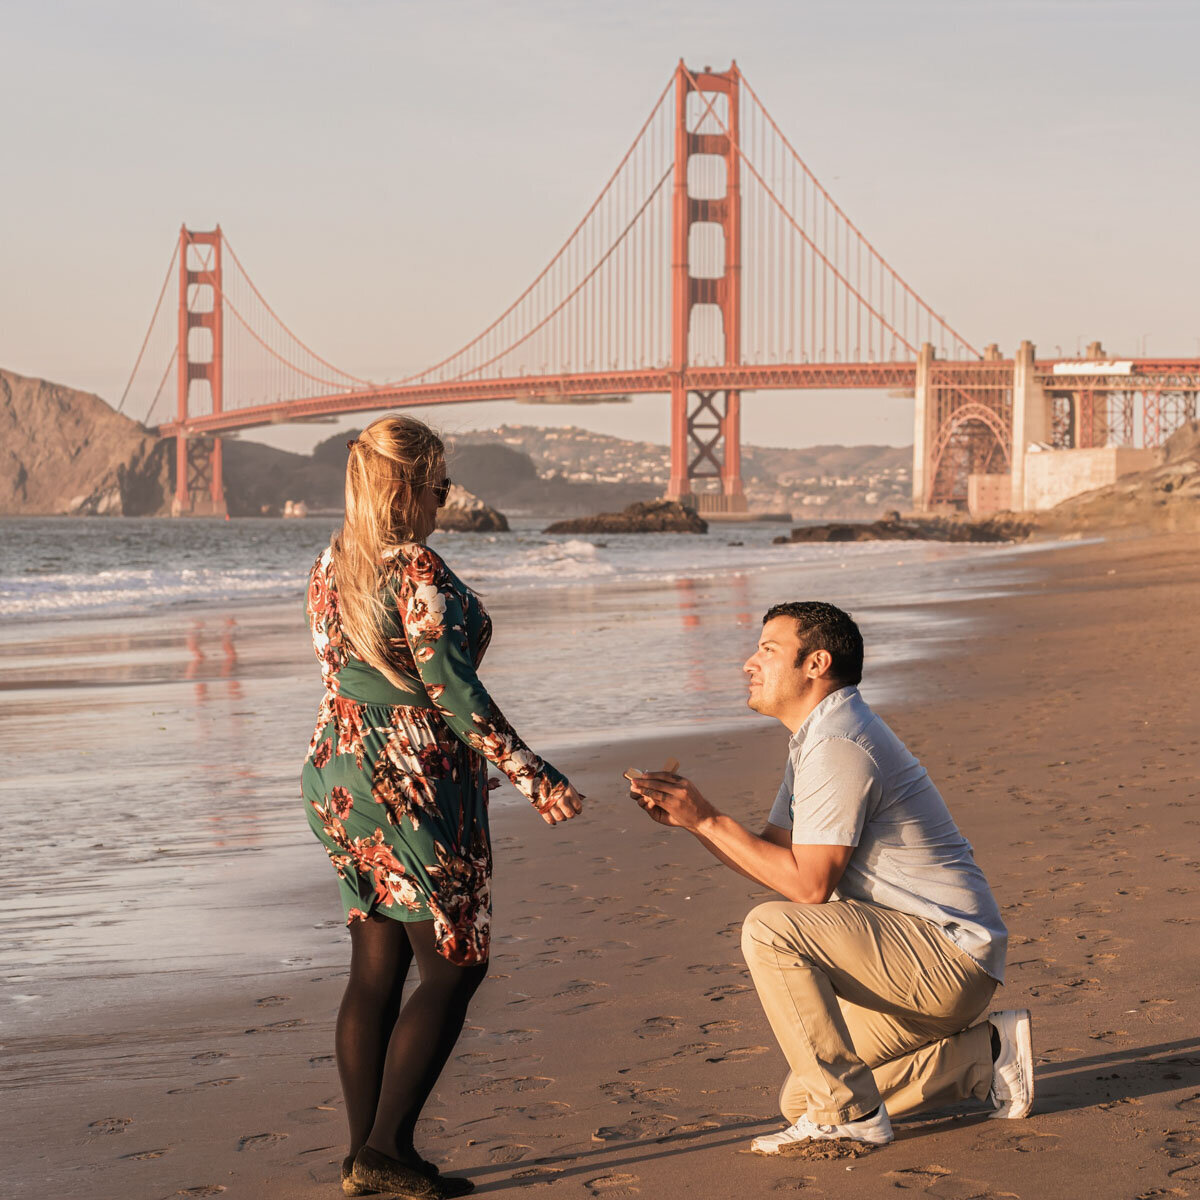 Romantic moment during the sunset for a proposal at Baker Beach in San Francisco. Photo by 4Karma Studio